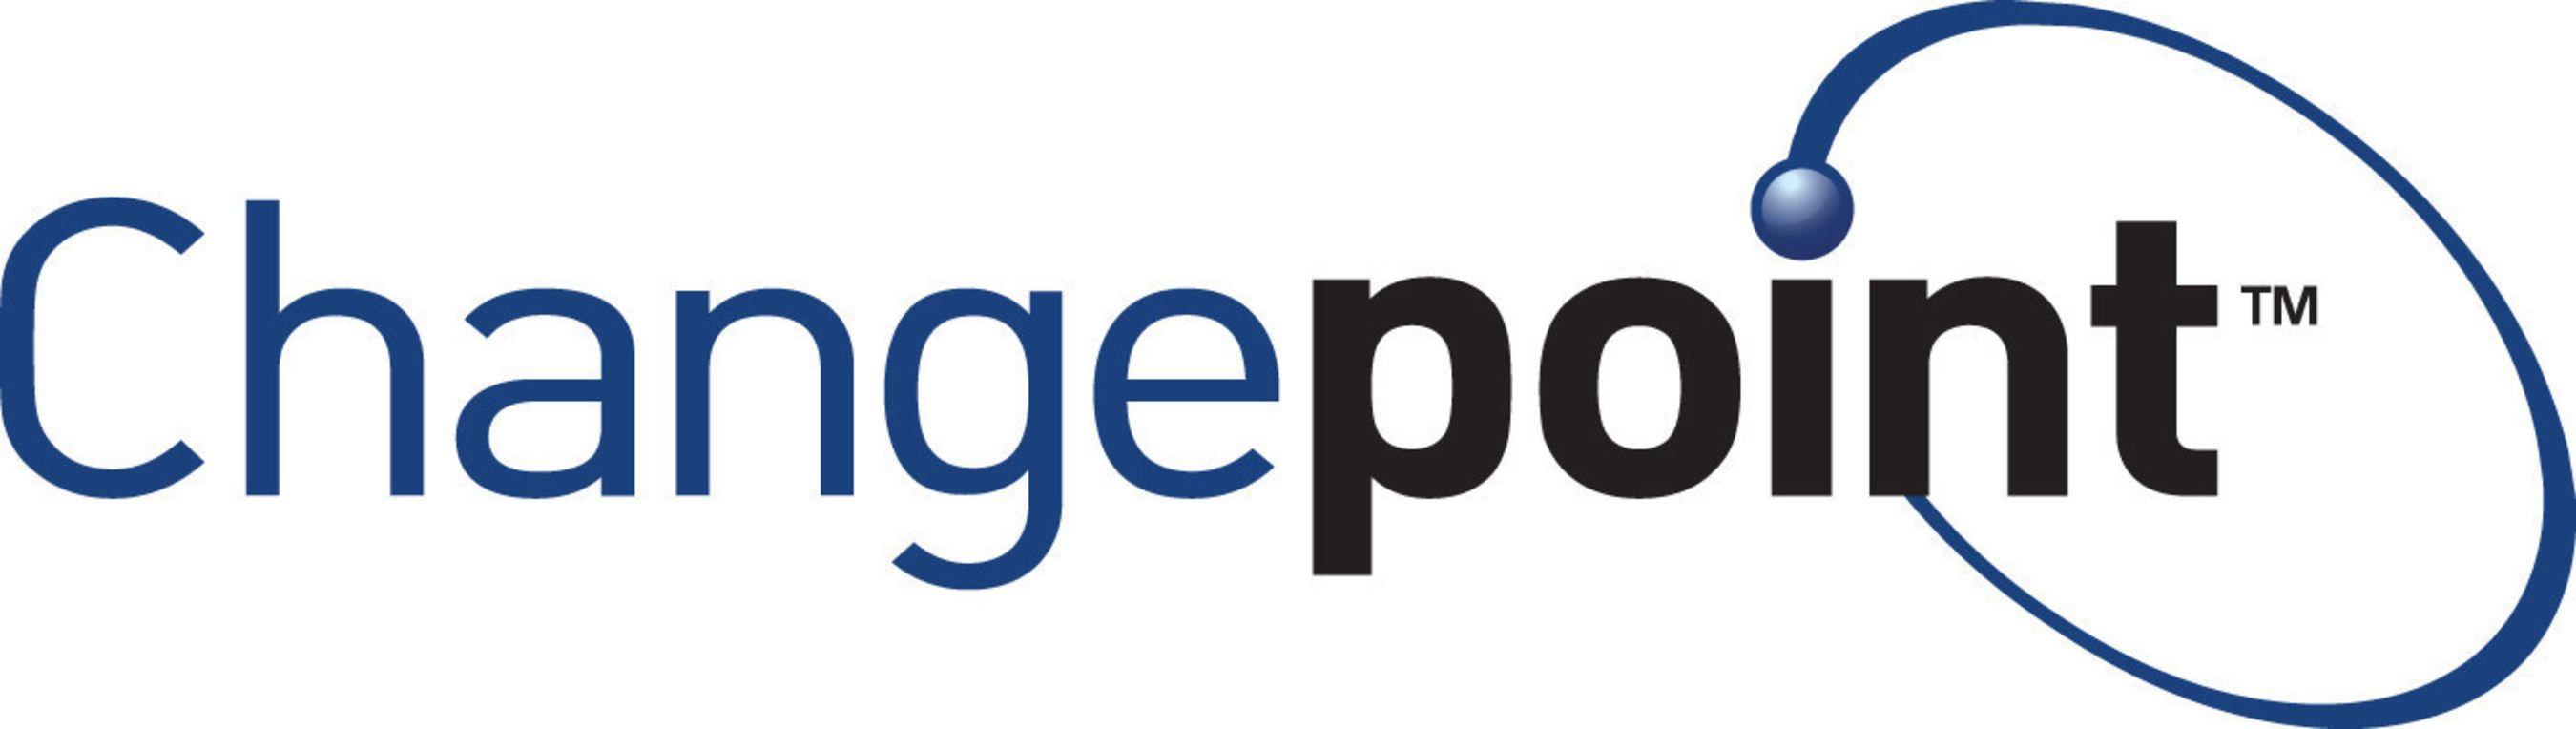 Changepoint Logo - Gartner Positions Changepoint as a Visionary in the 2015 Magic ...